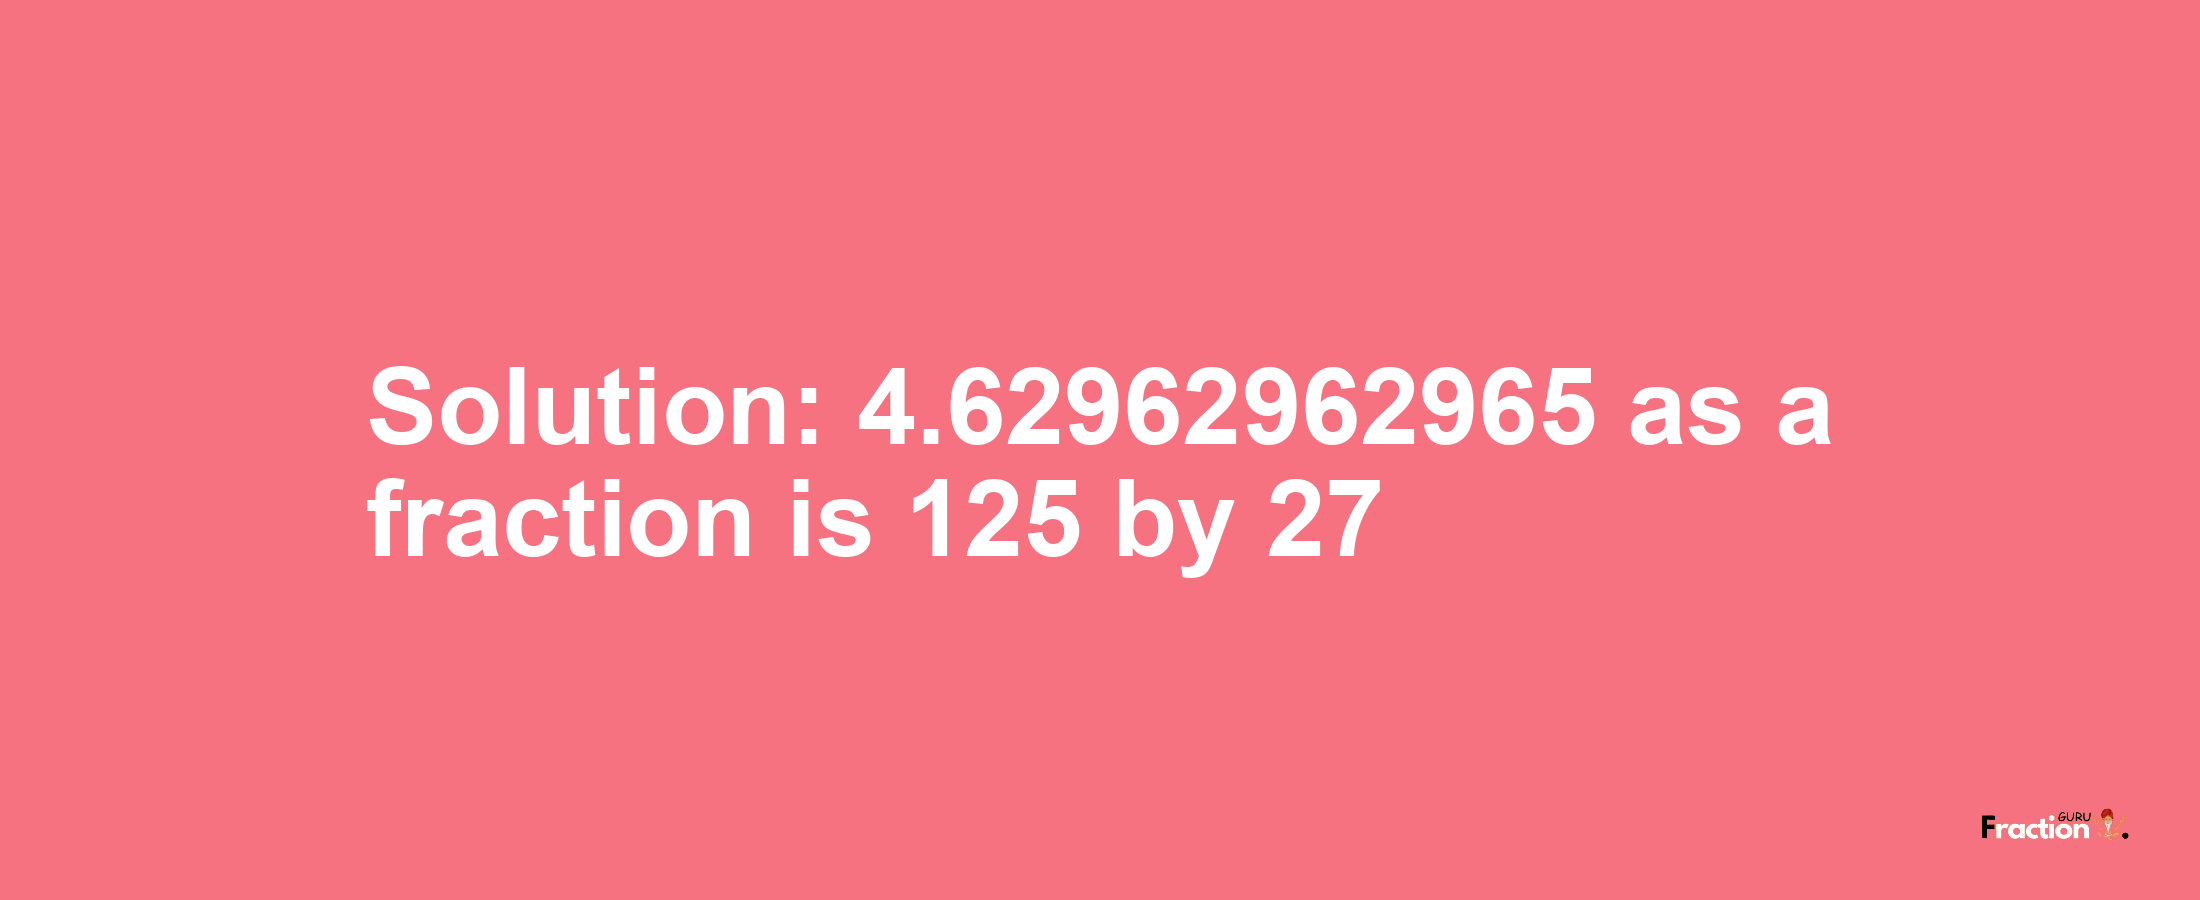 Solution:4.62962962965 as a fraction is 125/27